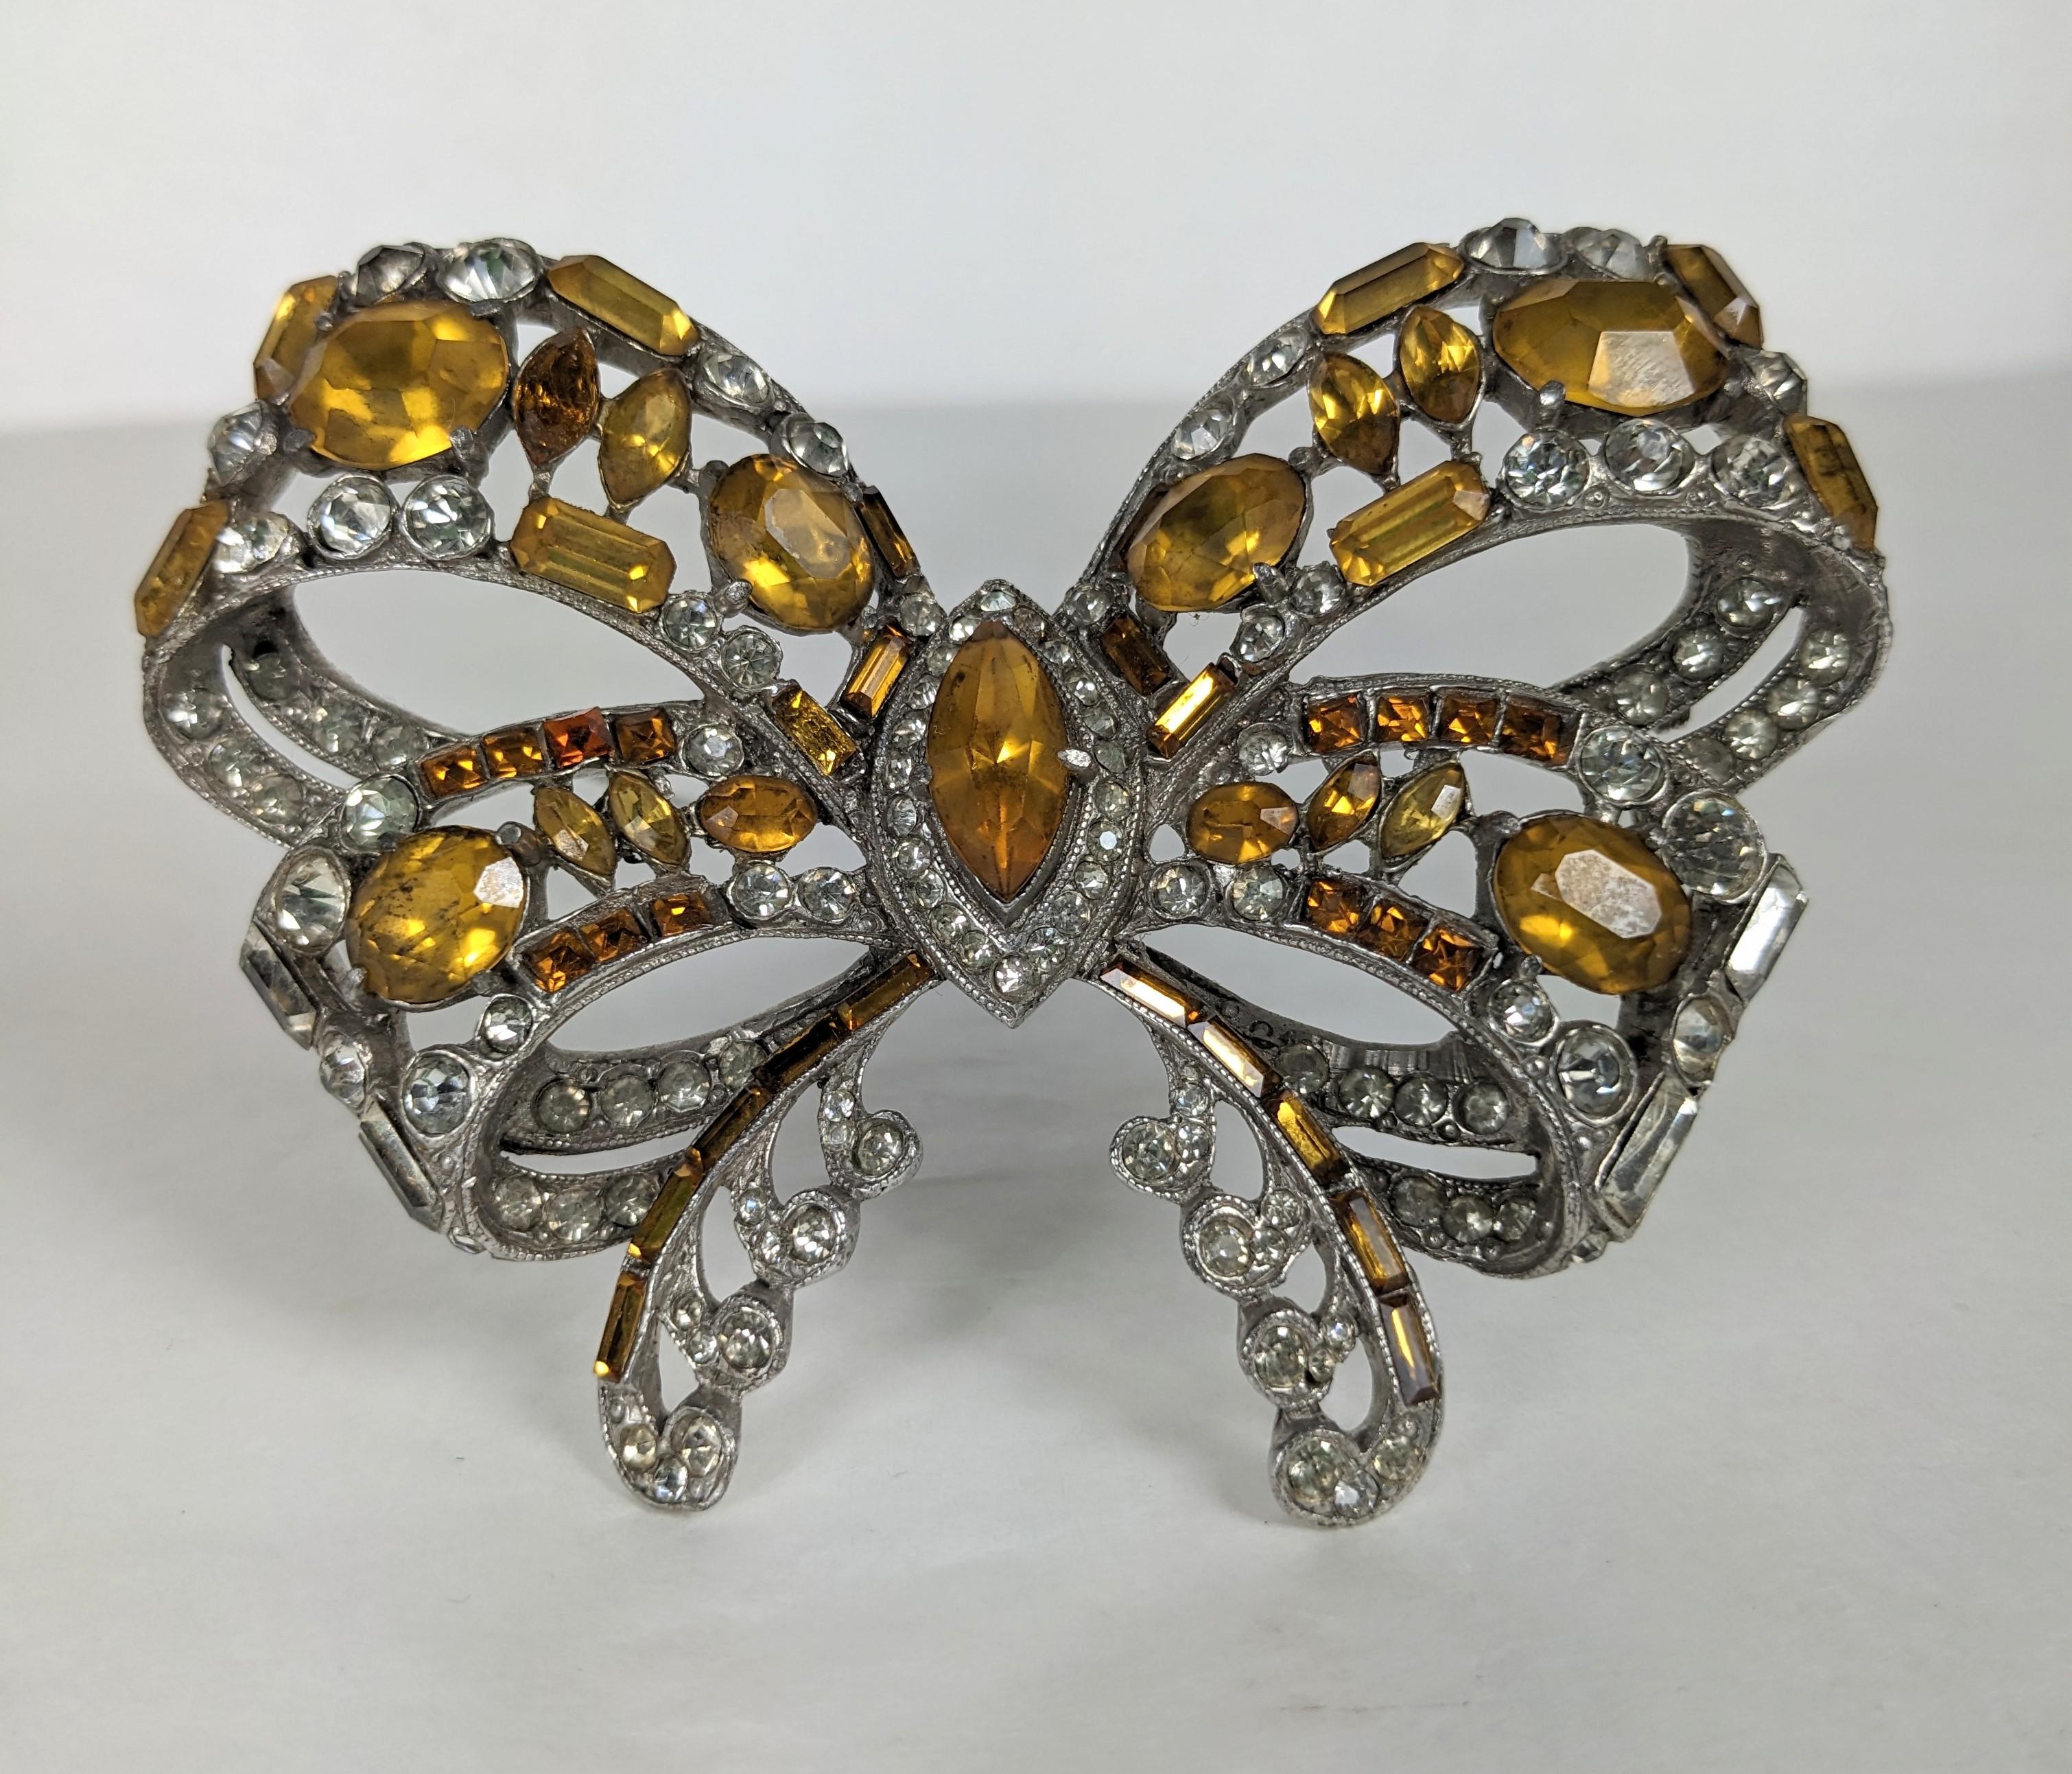 Massive Staret Topaz and Crystal Paste Deco Bow from the 1940's. Huge scale with vari shaped topaz stones in  navette, square, oval and baguette shapes with crystal accents designed in the 18th Century style. 3.5